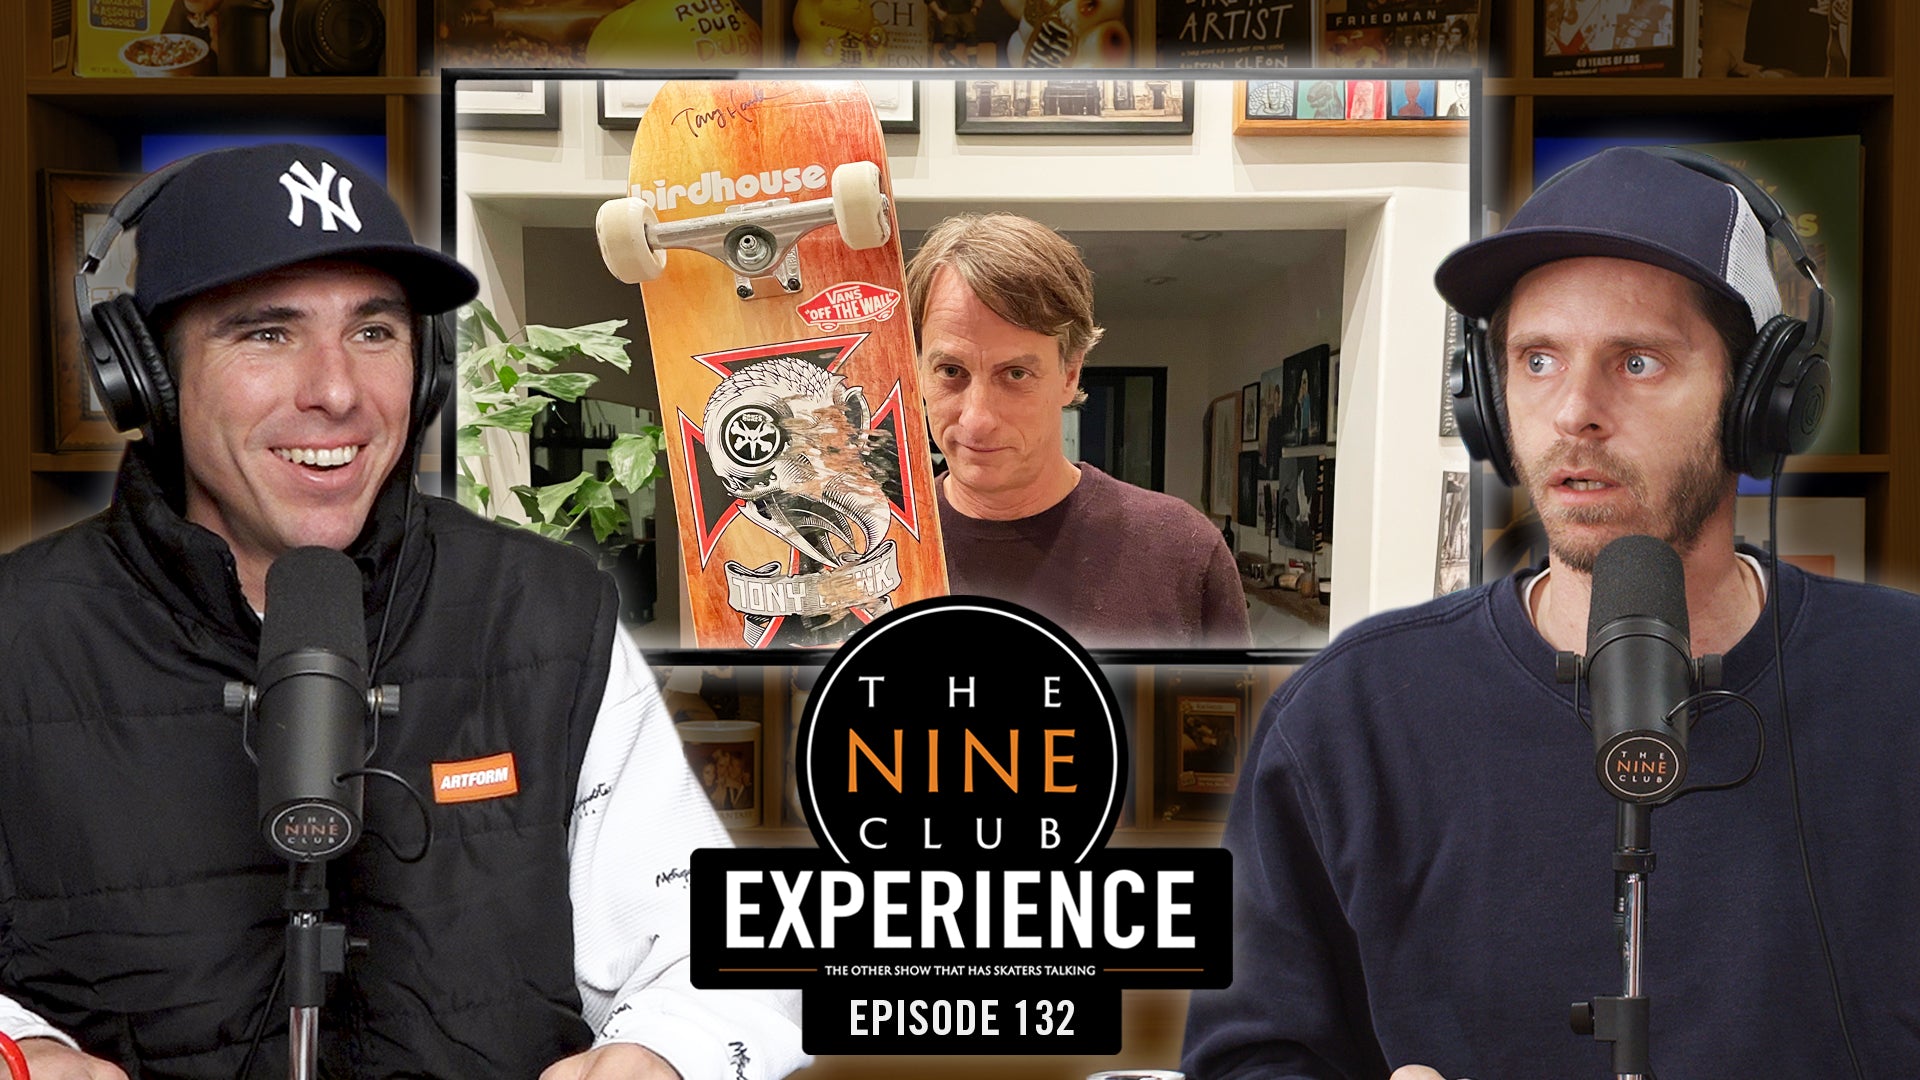 The Nine Club Experience Episode 132